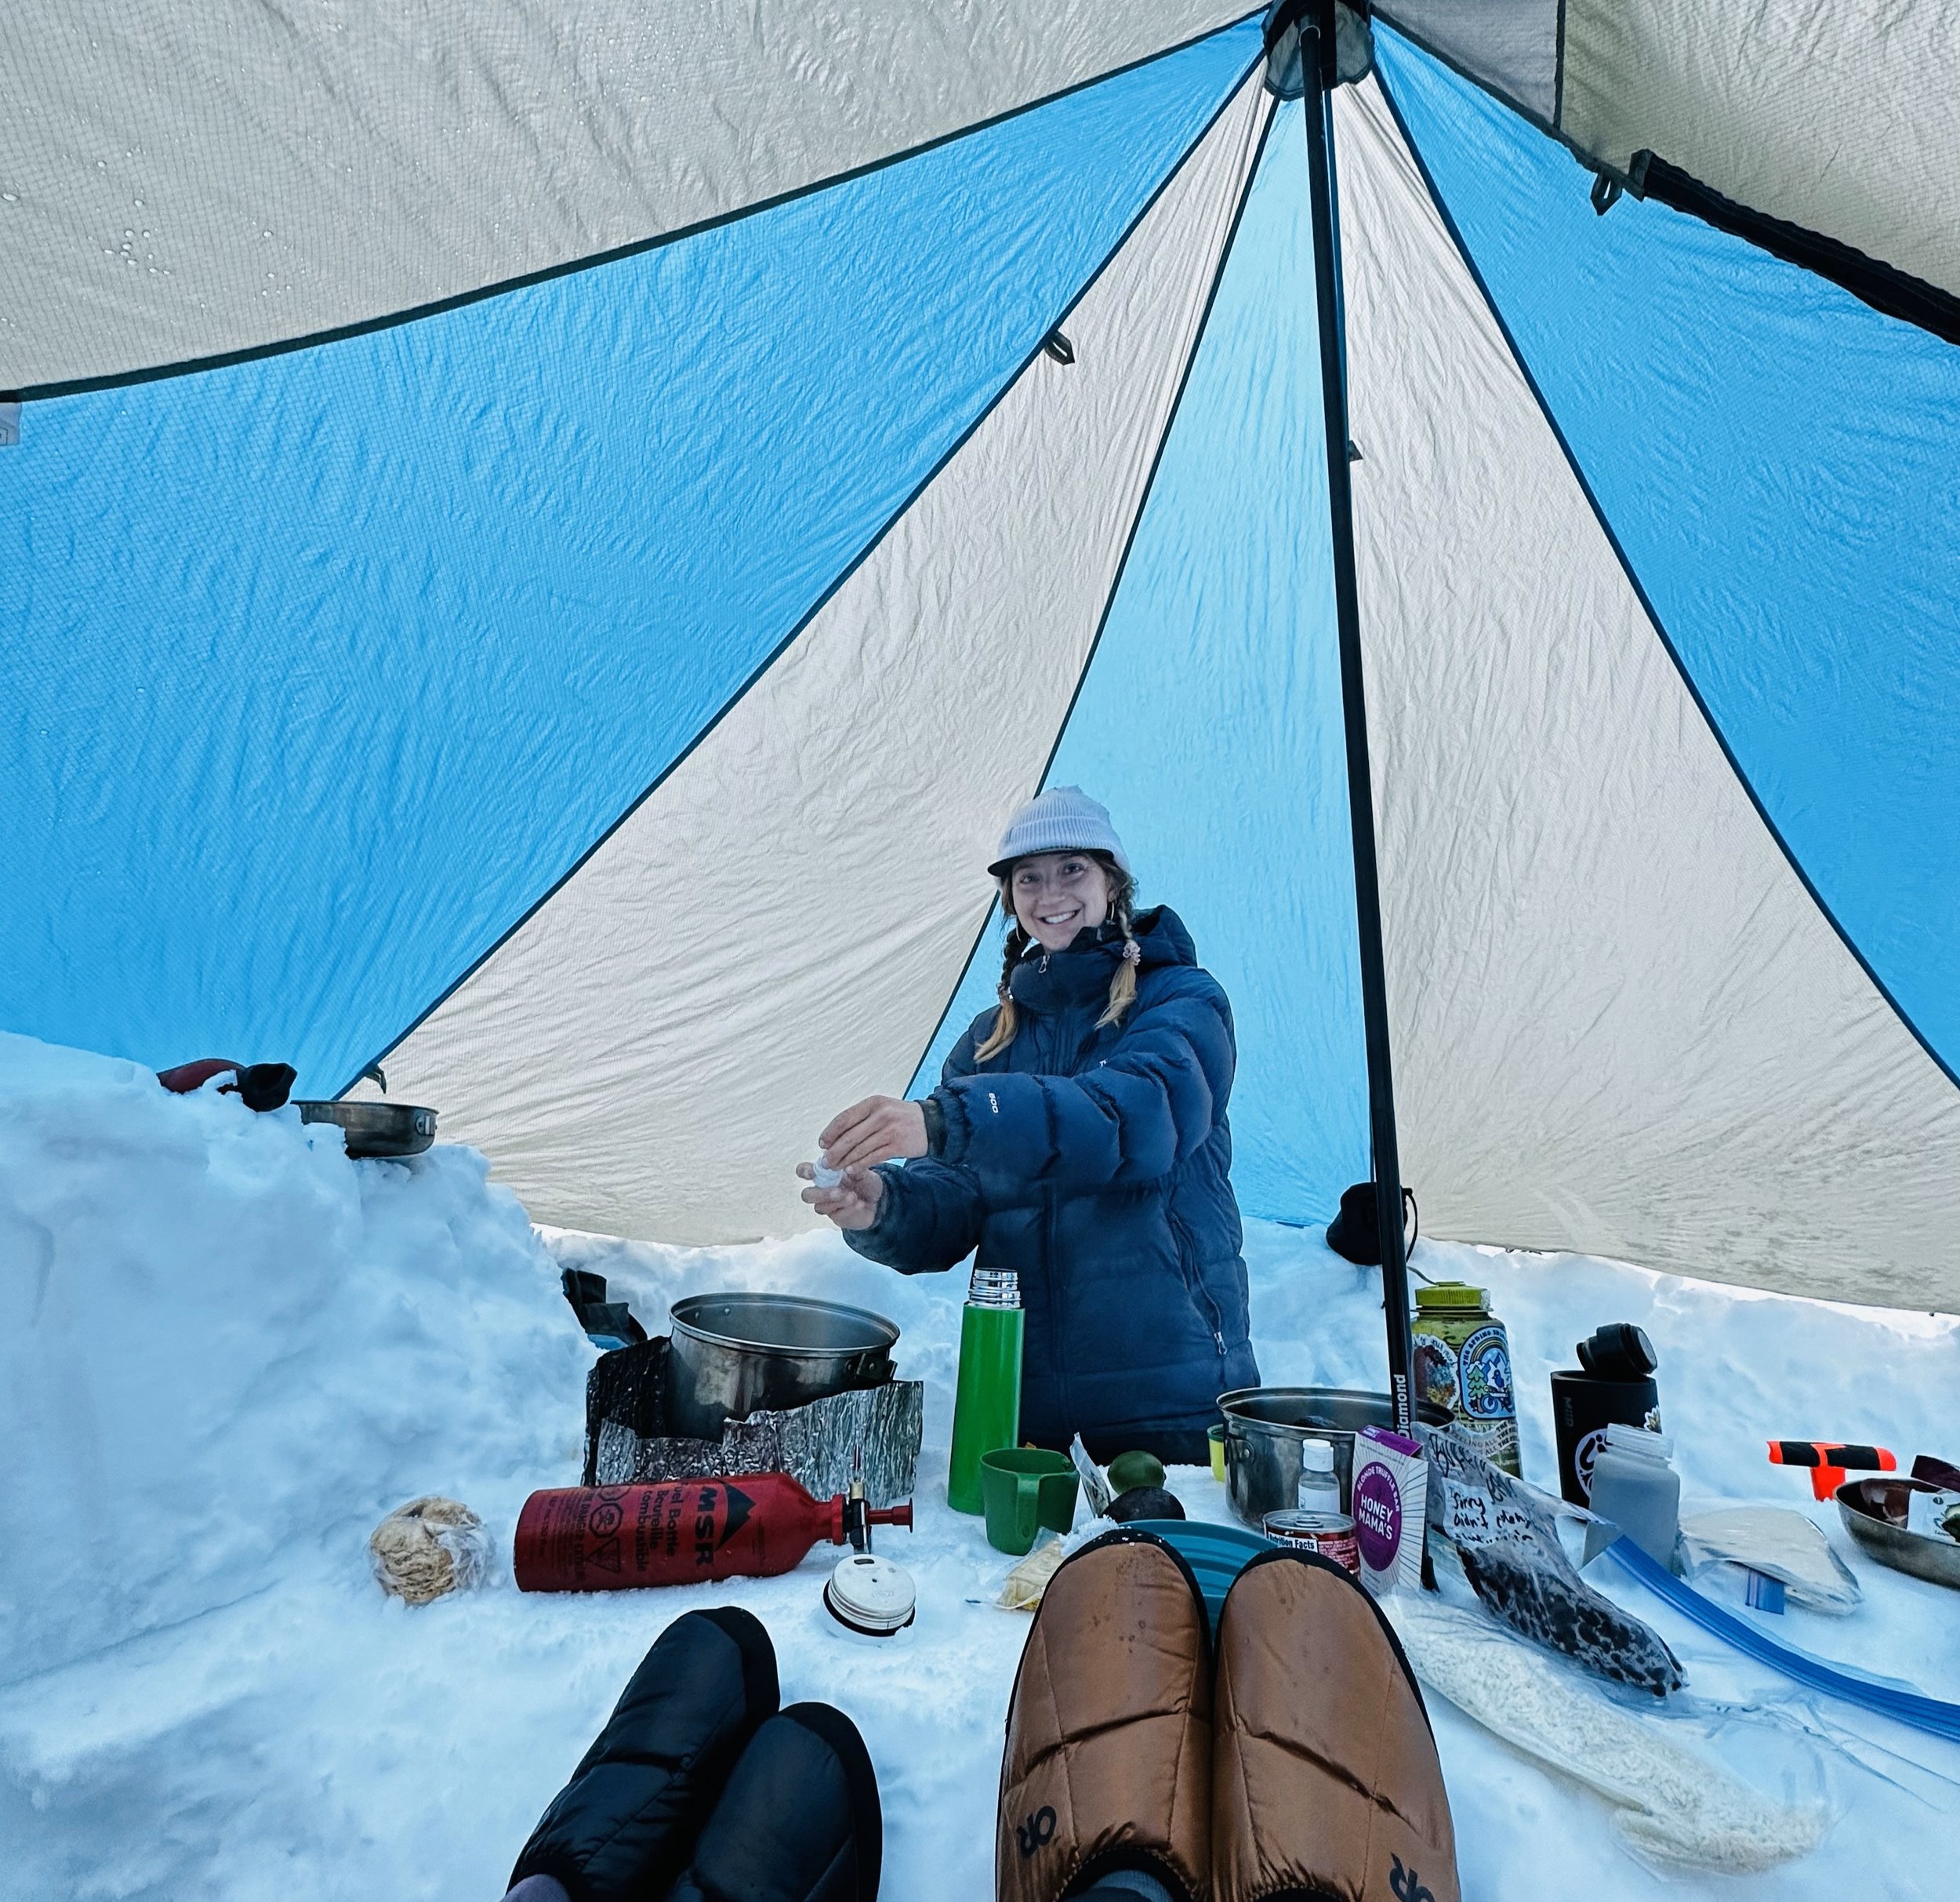 Guide- Tailor preps food in the basecamp tent.